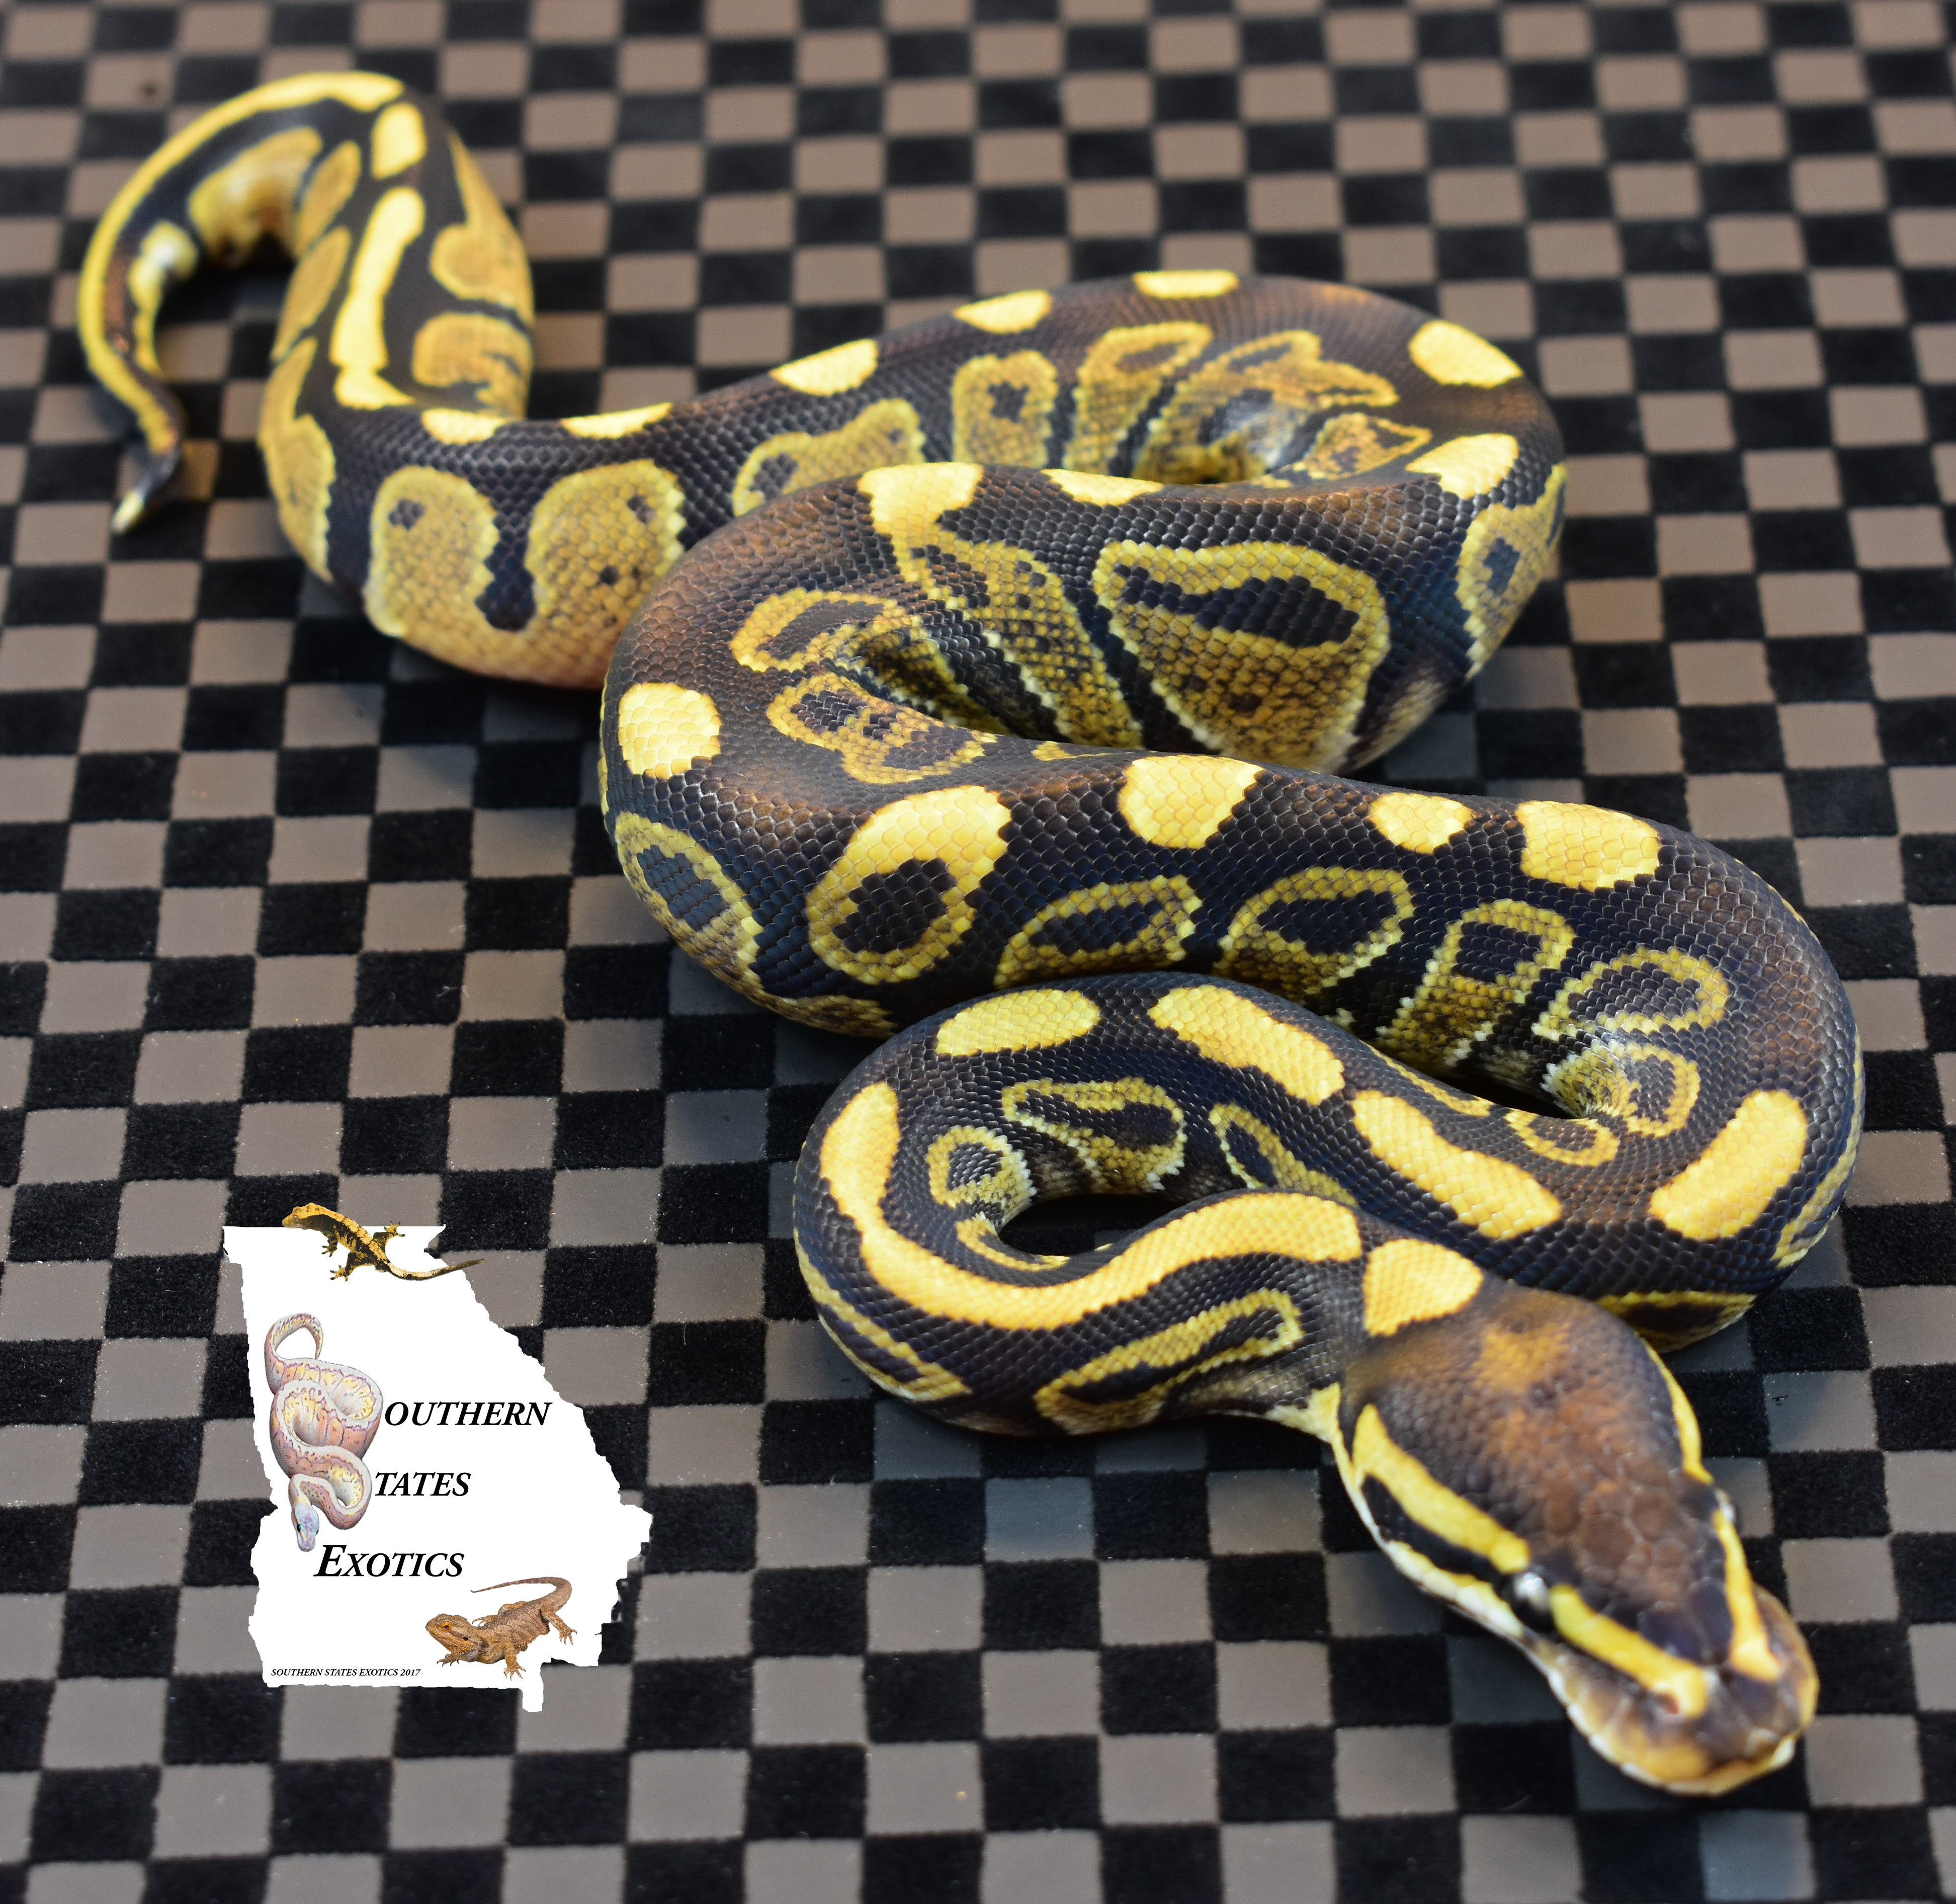 Sable Ball Python by Southern States Exotics